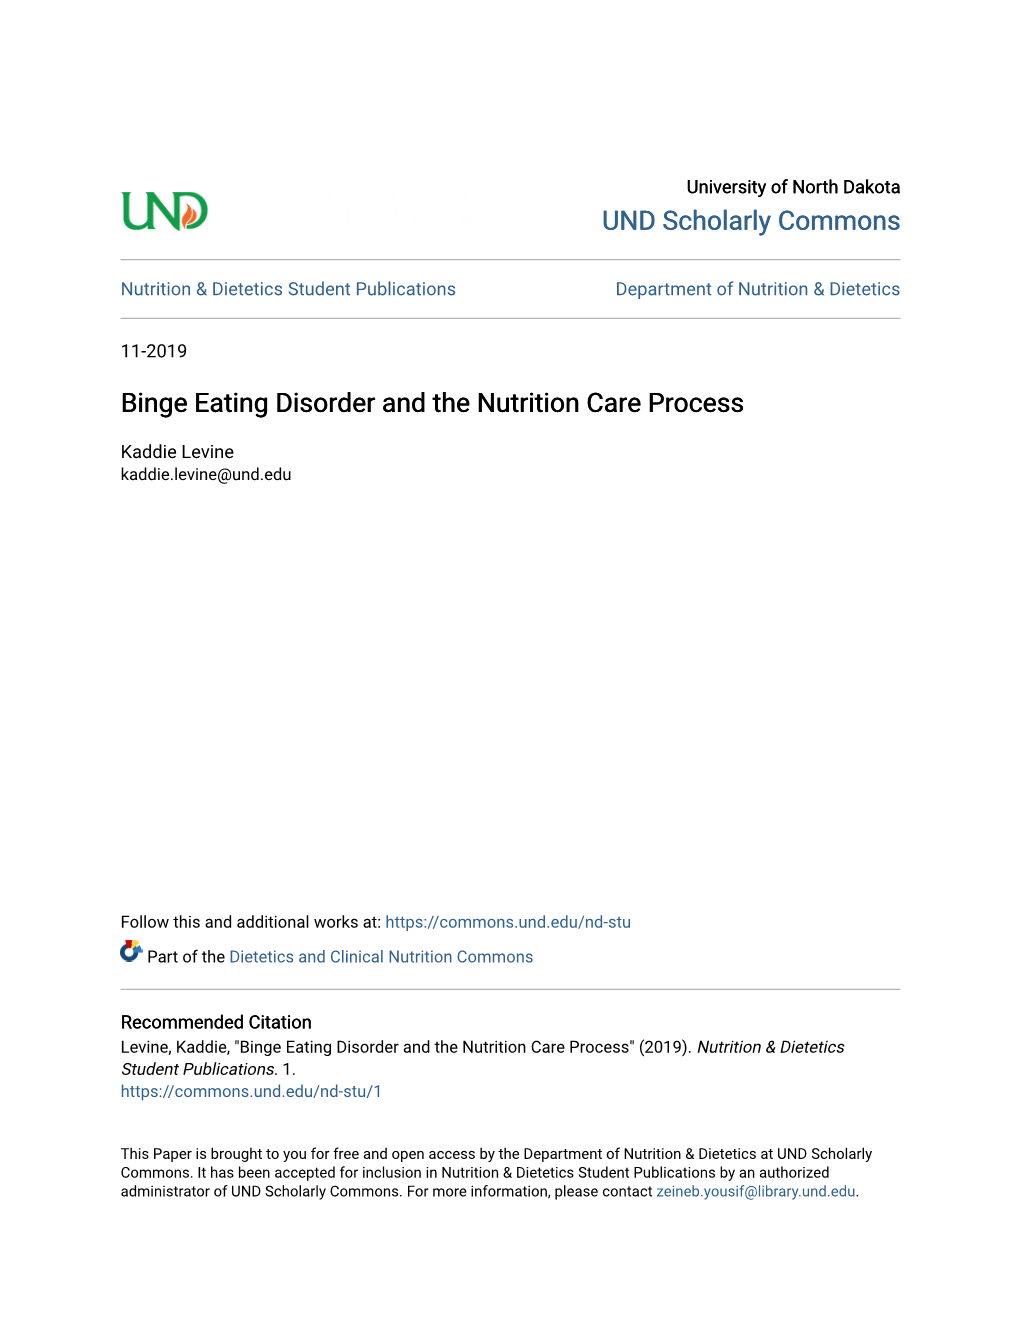 Binge Eating Disorder and the Nutrition Care Process